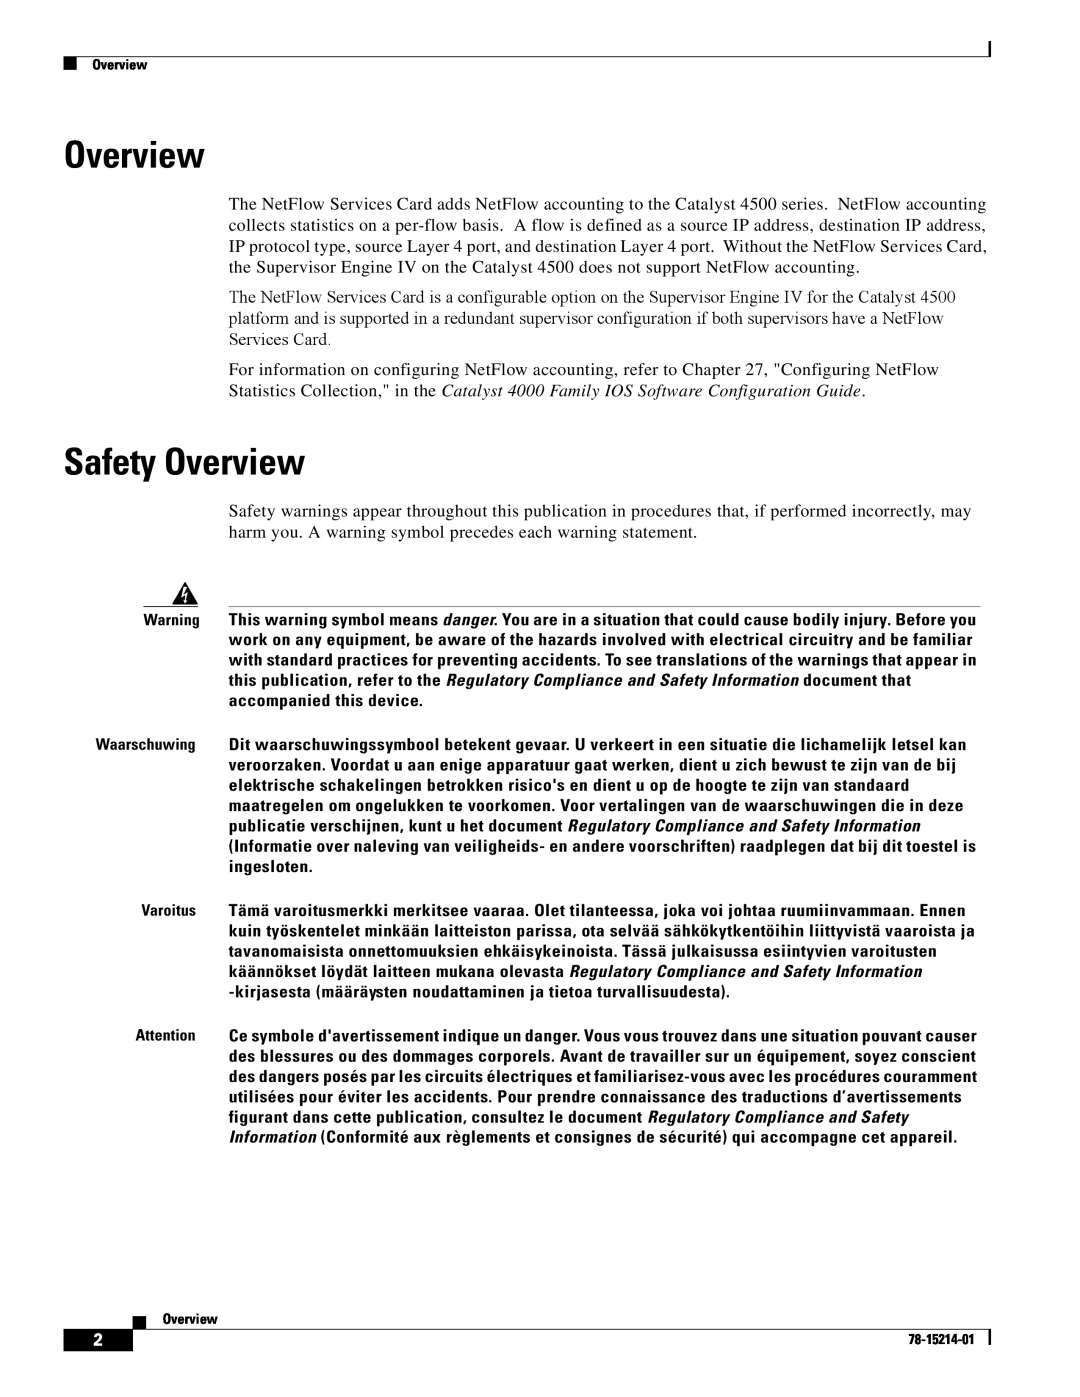 Cisco Systems WS-F4531 manual Safety Overview 